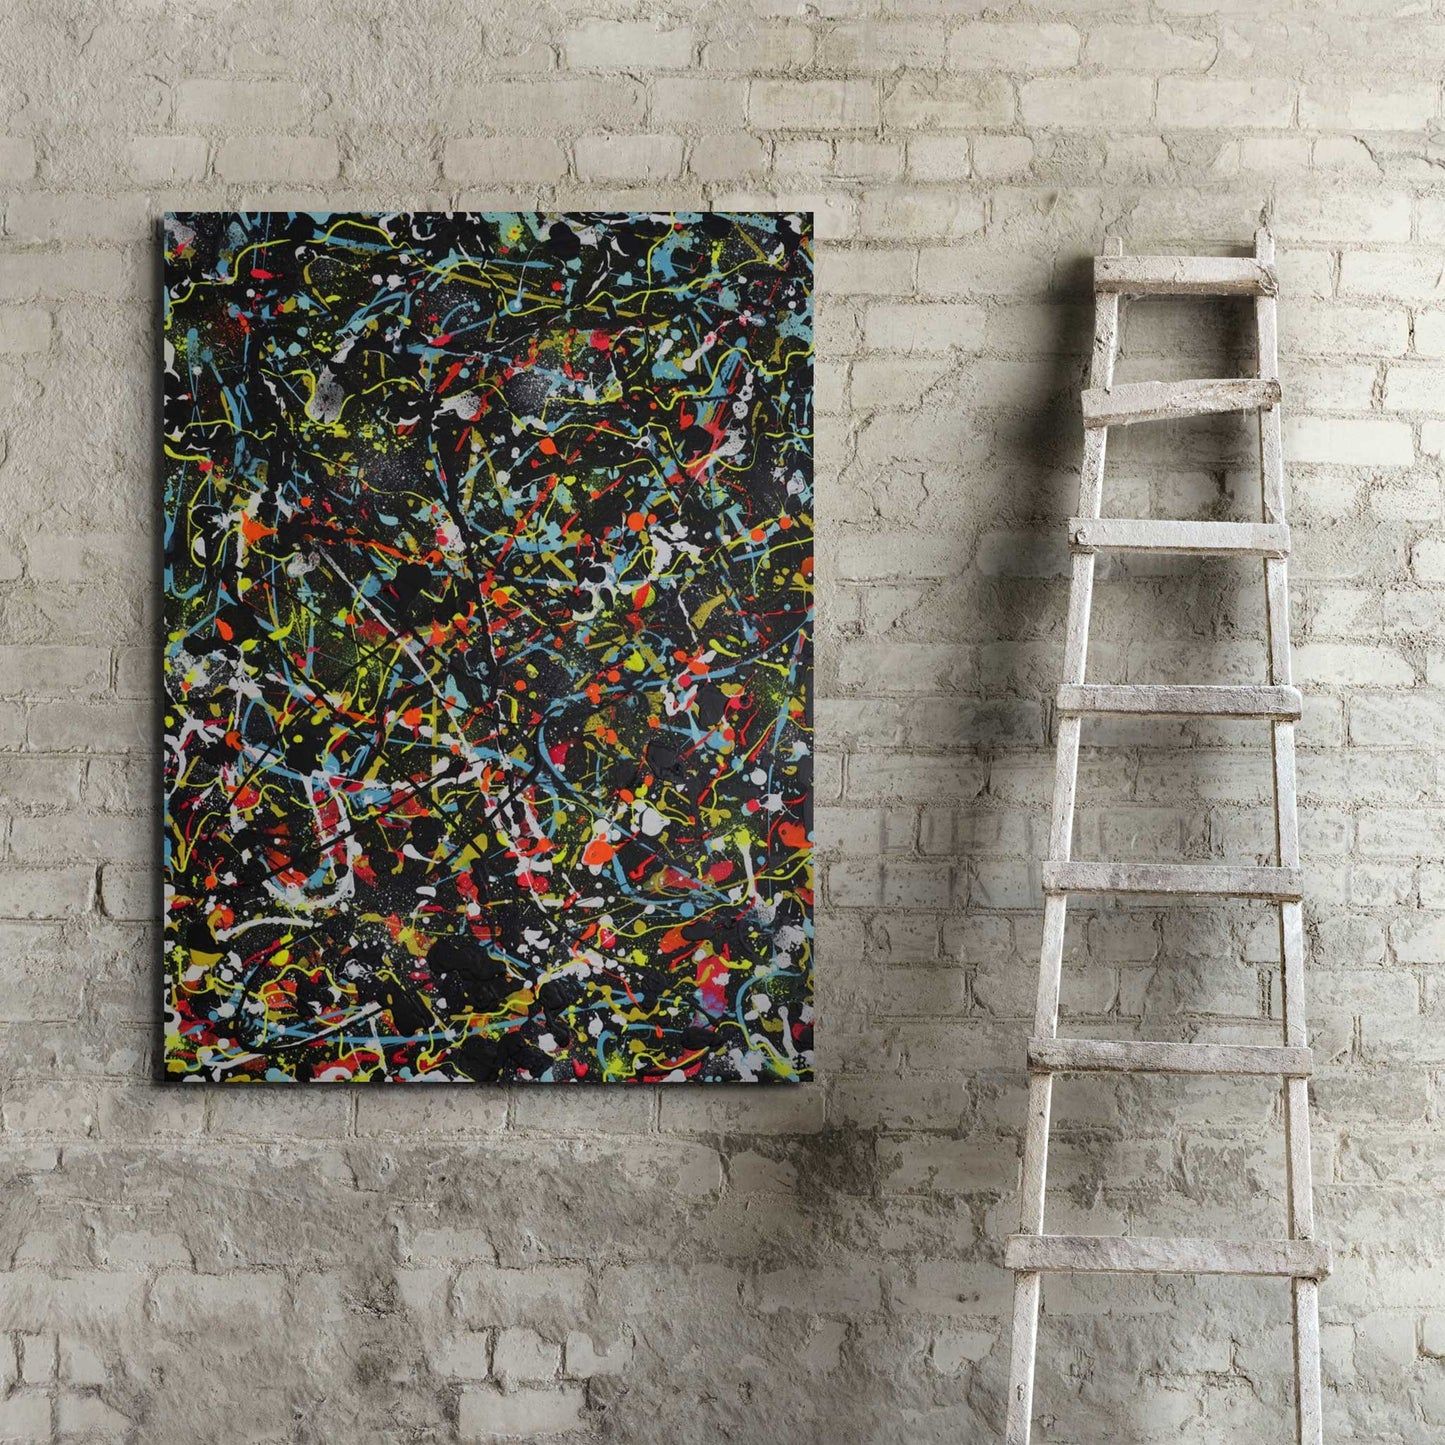 New colourful, abstract expressionism painting, 'Onyx' by Bridget Bradley, seen hanging on brick wall by ladder in industrial apartment space. Learn more